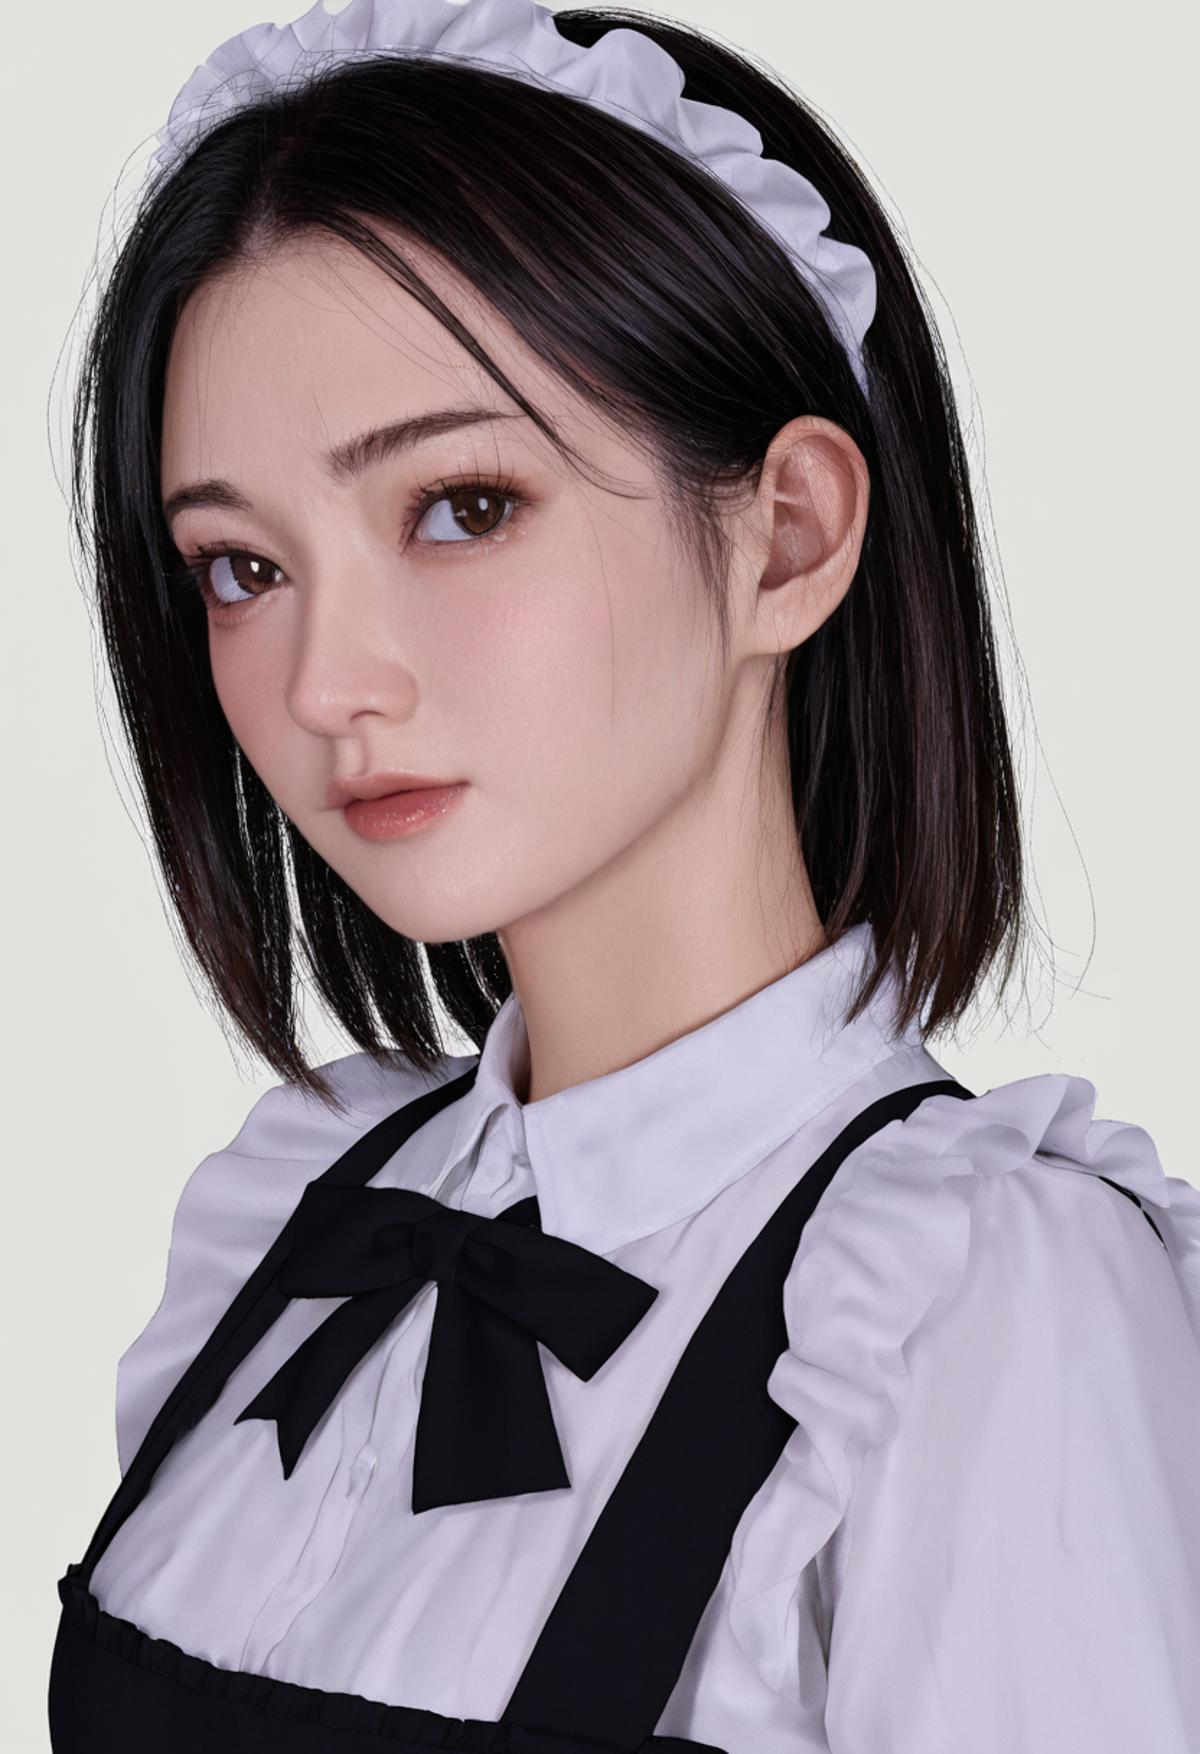 AI model image by polyx